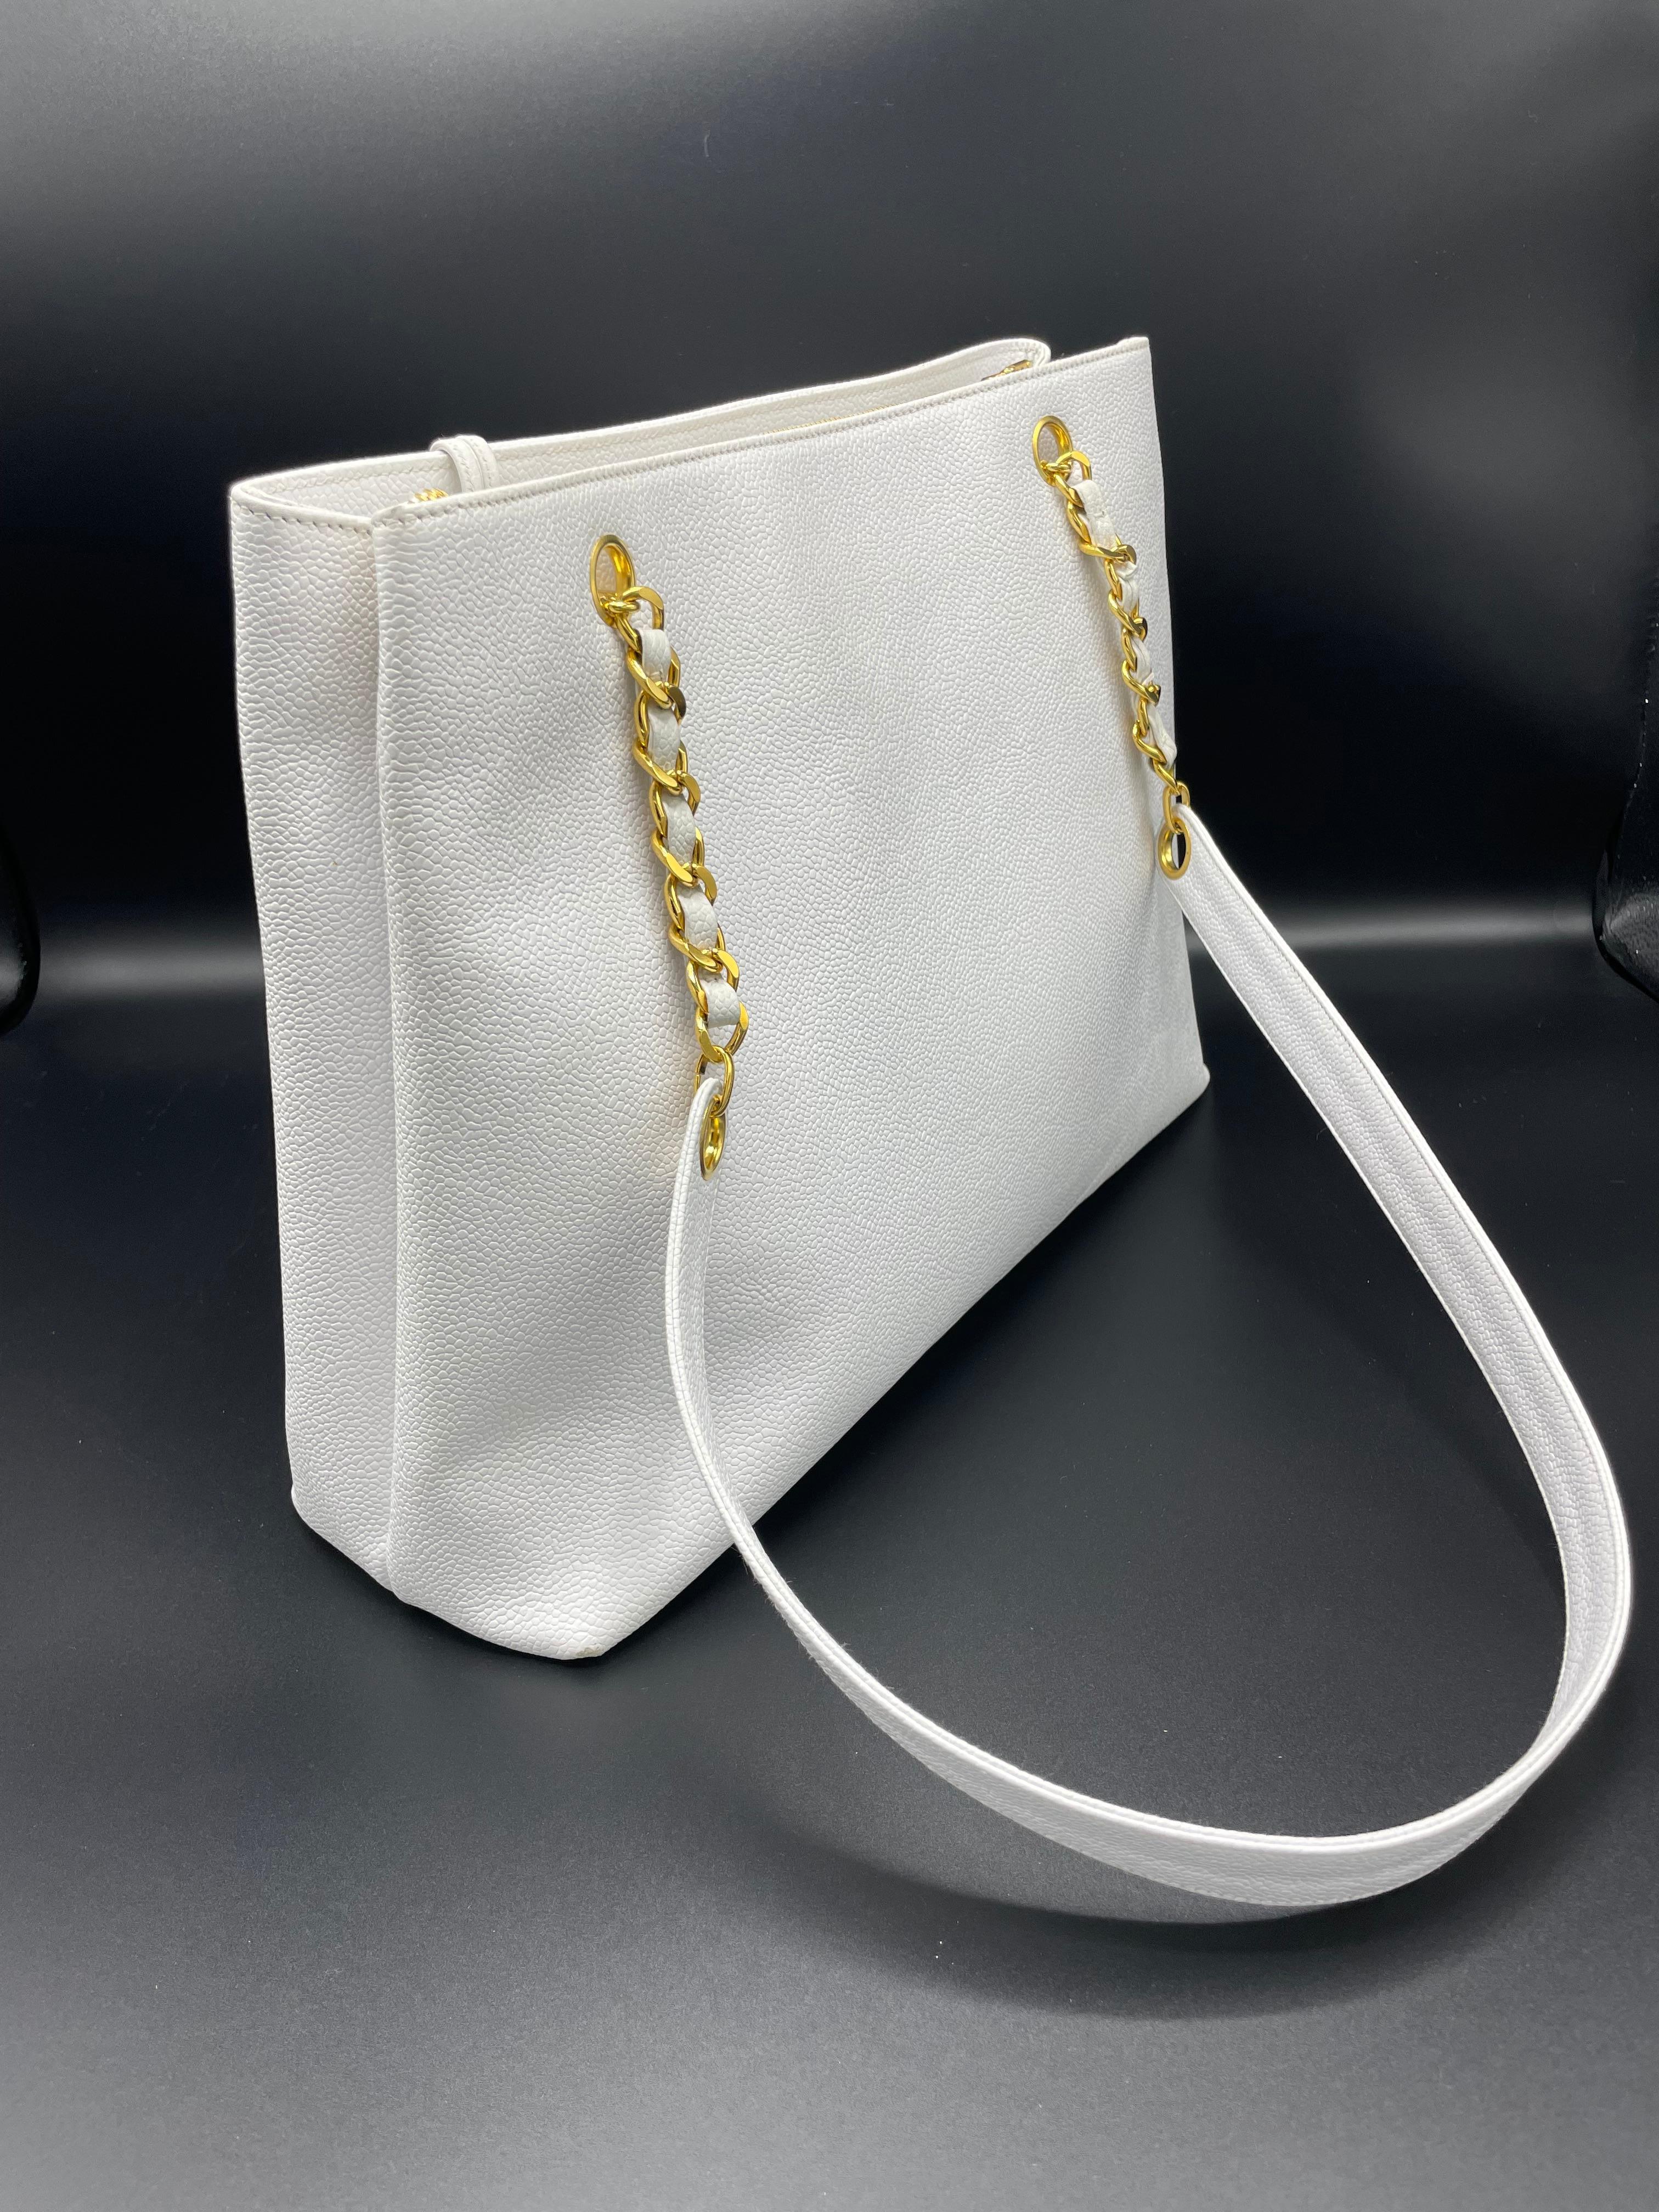 Chanel White Caviar Leather Front Pocket Tote Bag For Sale 5